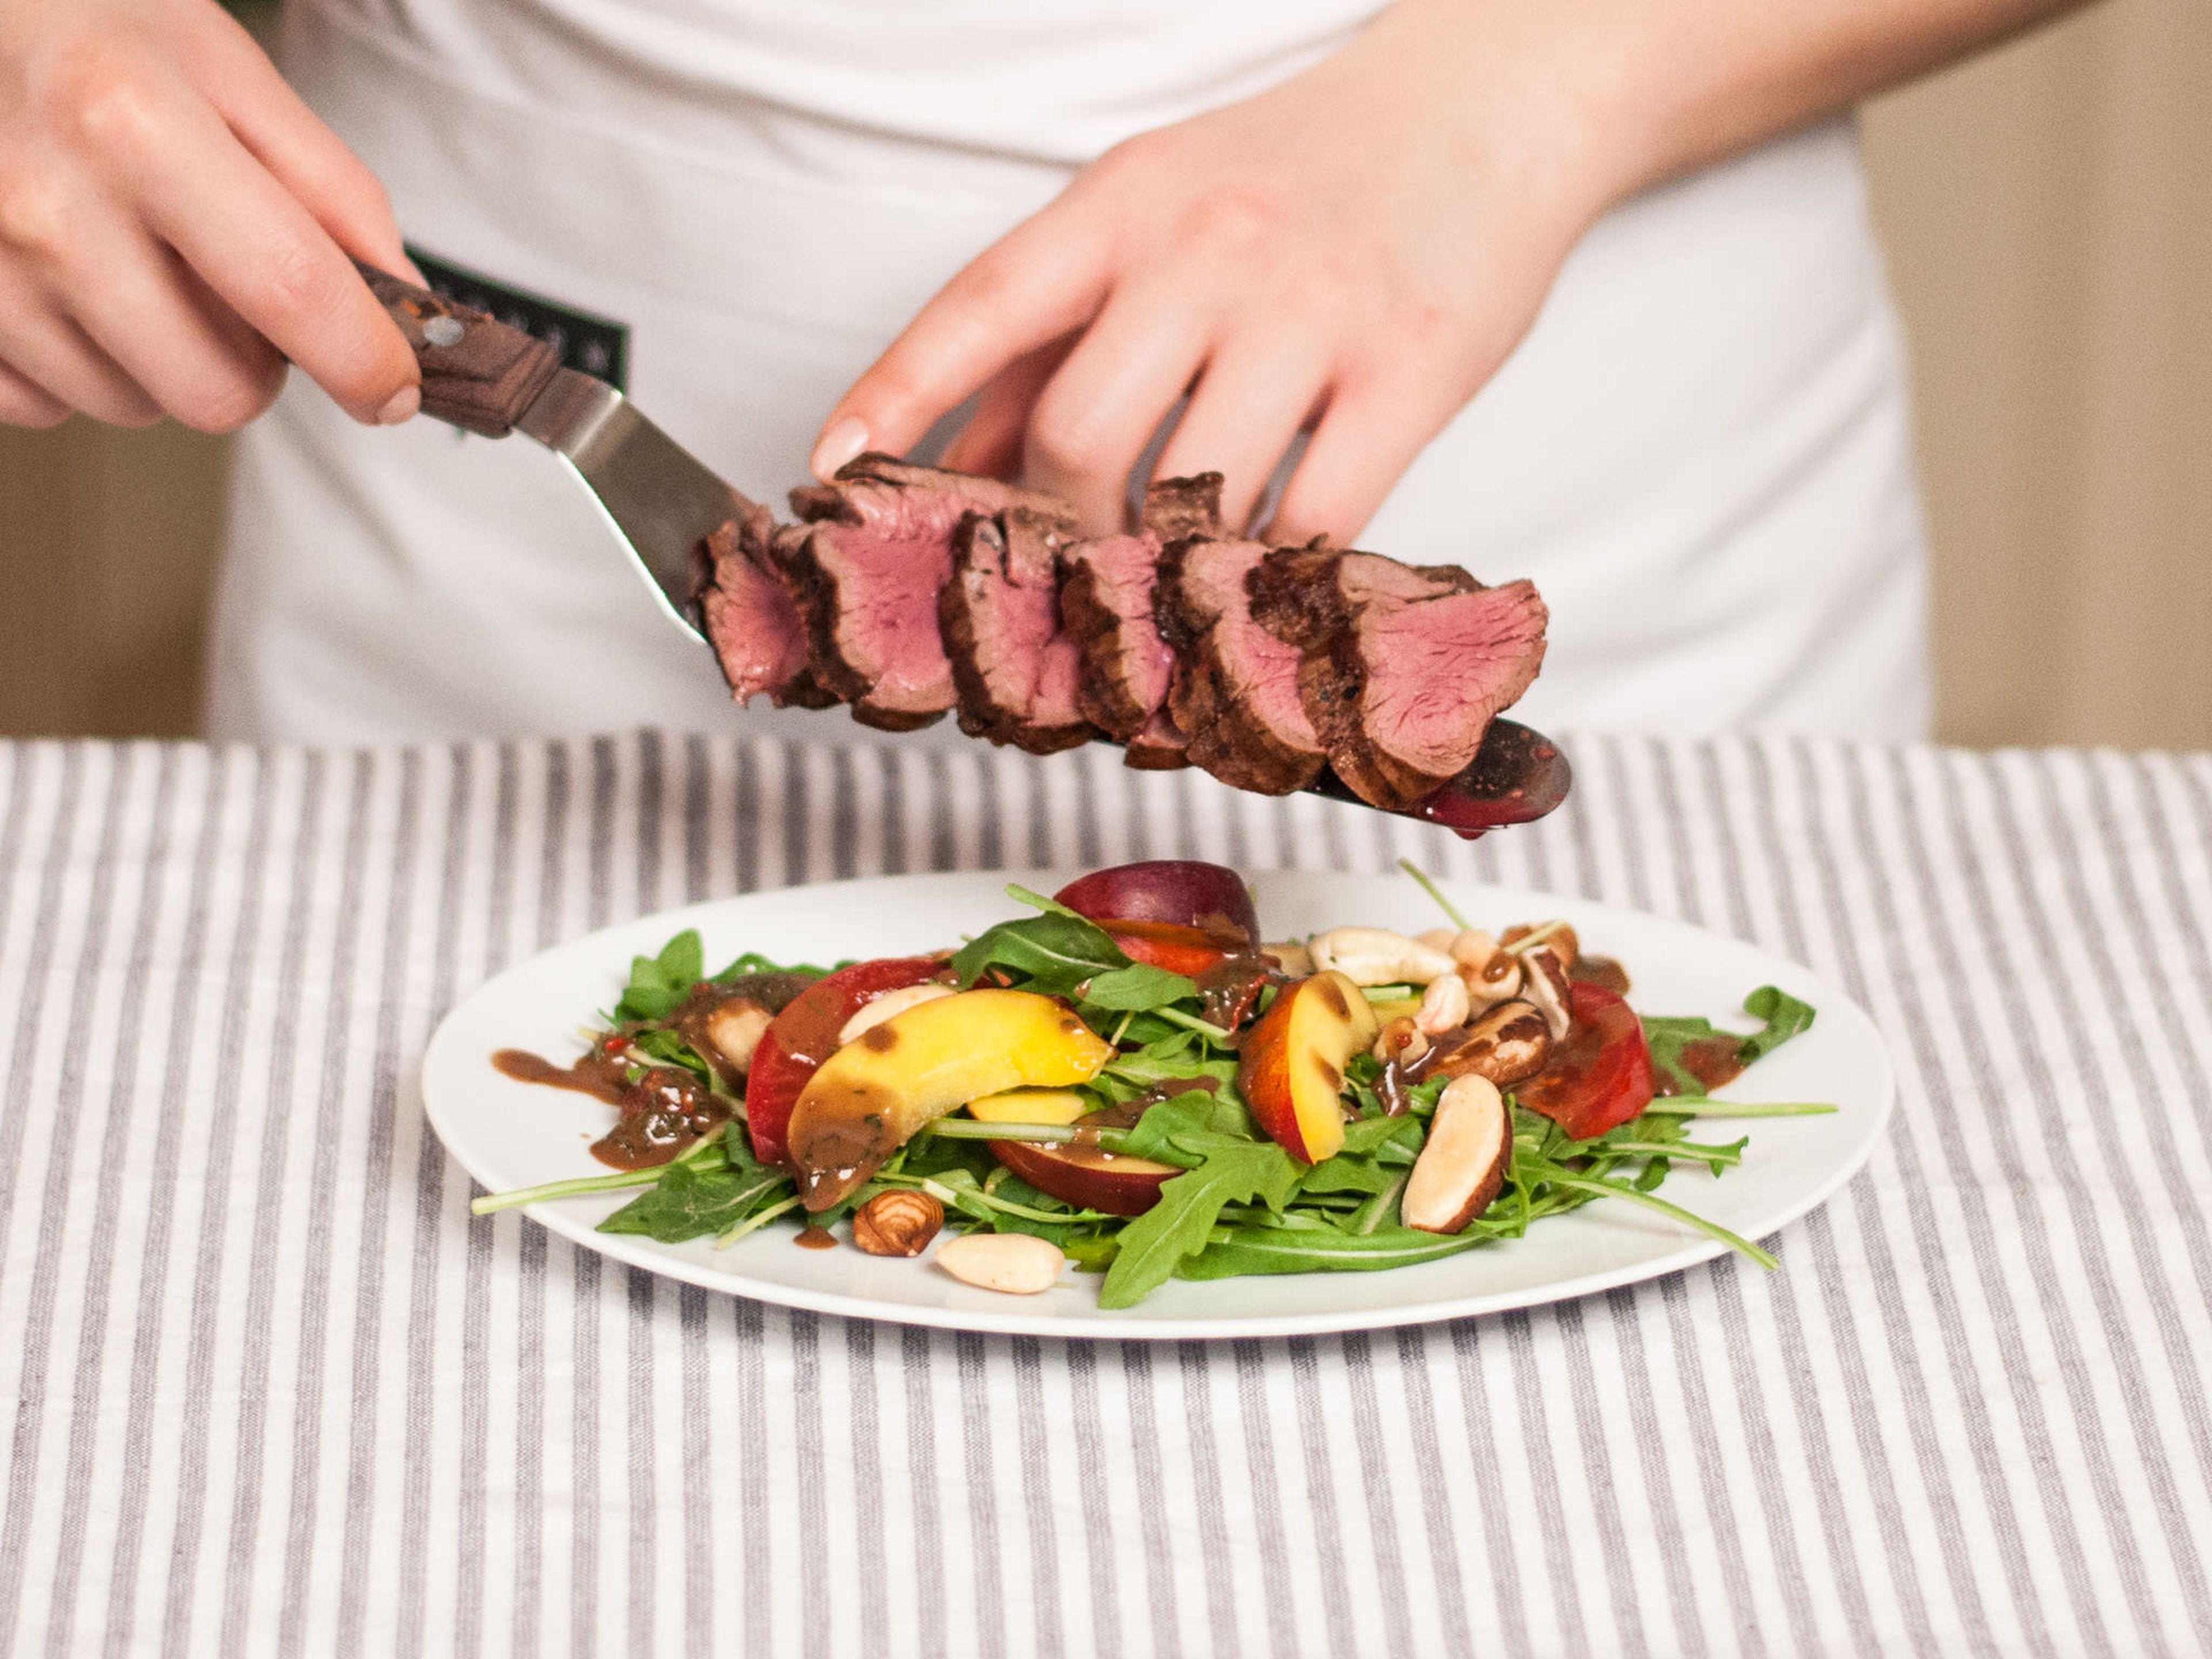 In a salad bowl, toss arugula, tomatoes, and nectarines with the dressing and place on serving plates. Slice up tenderloin and arrange on top of the salad. Sprinkle with toasted nuts and season again with salt and pepper before serving.